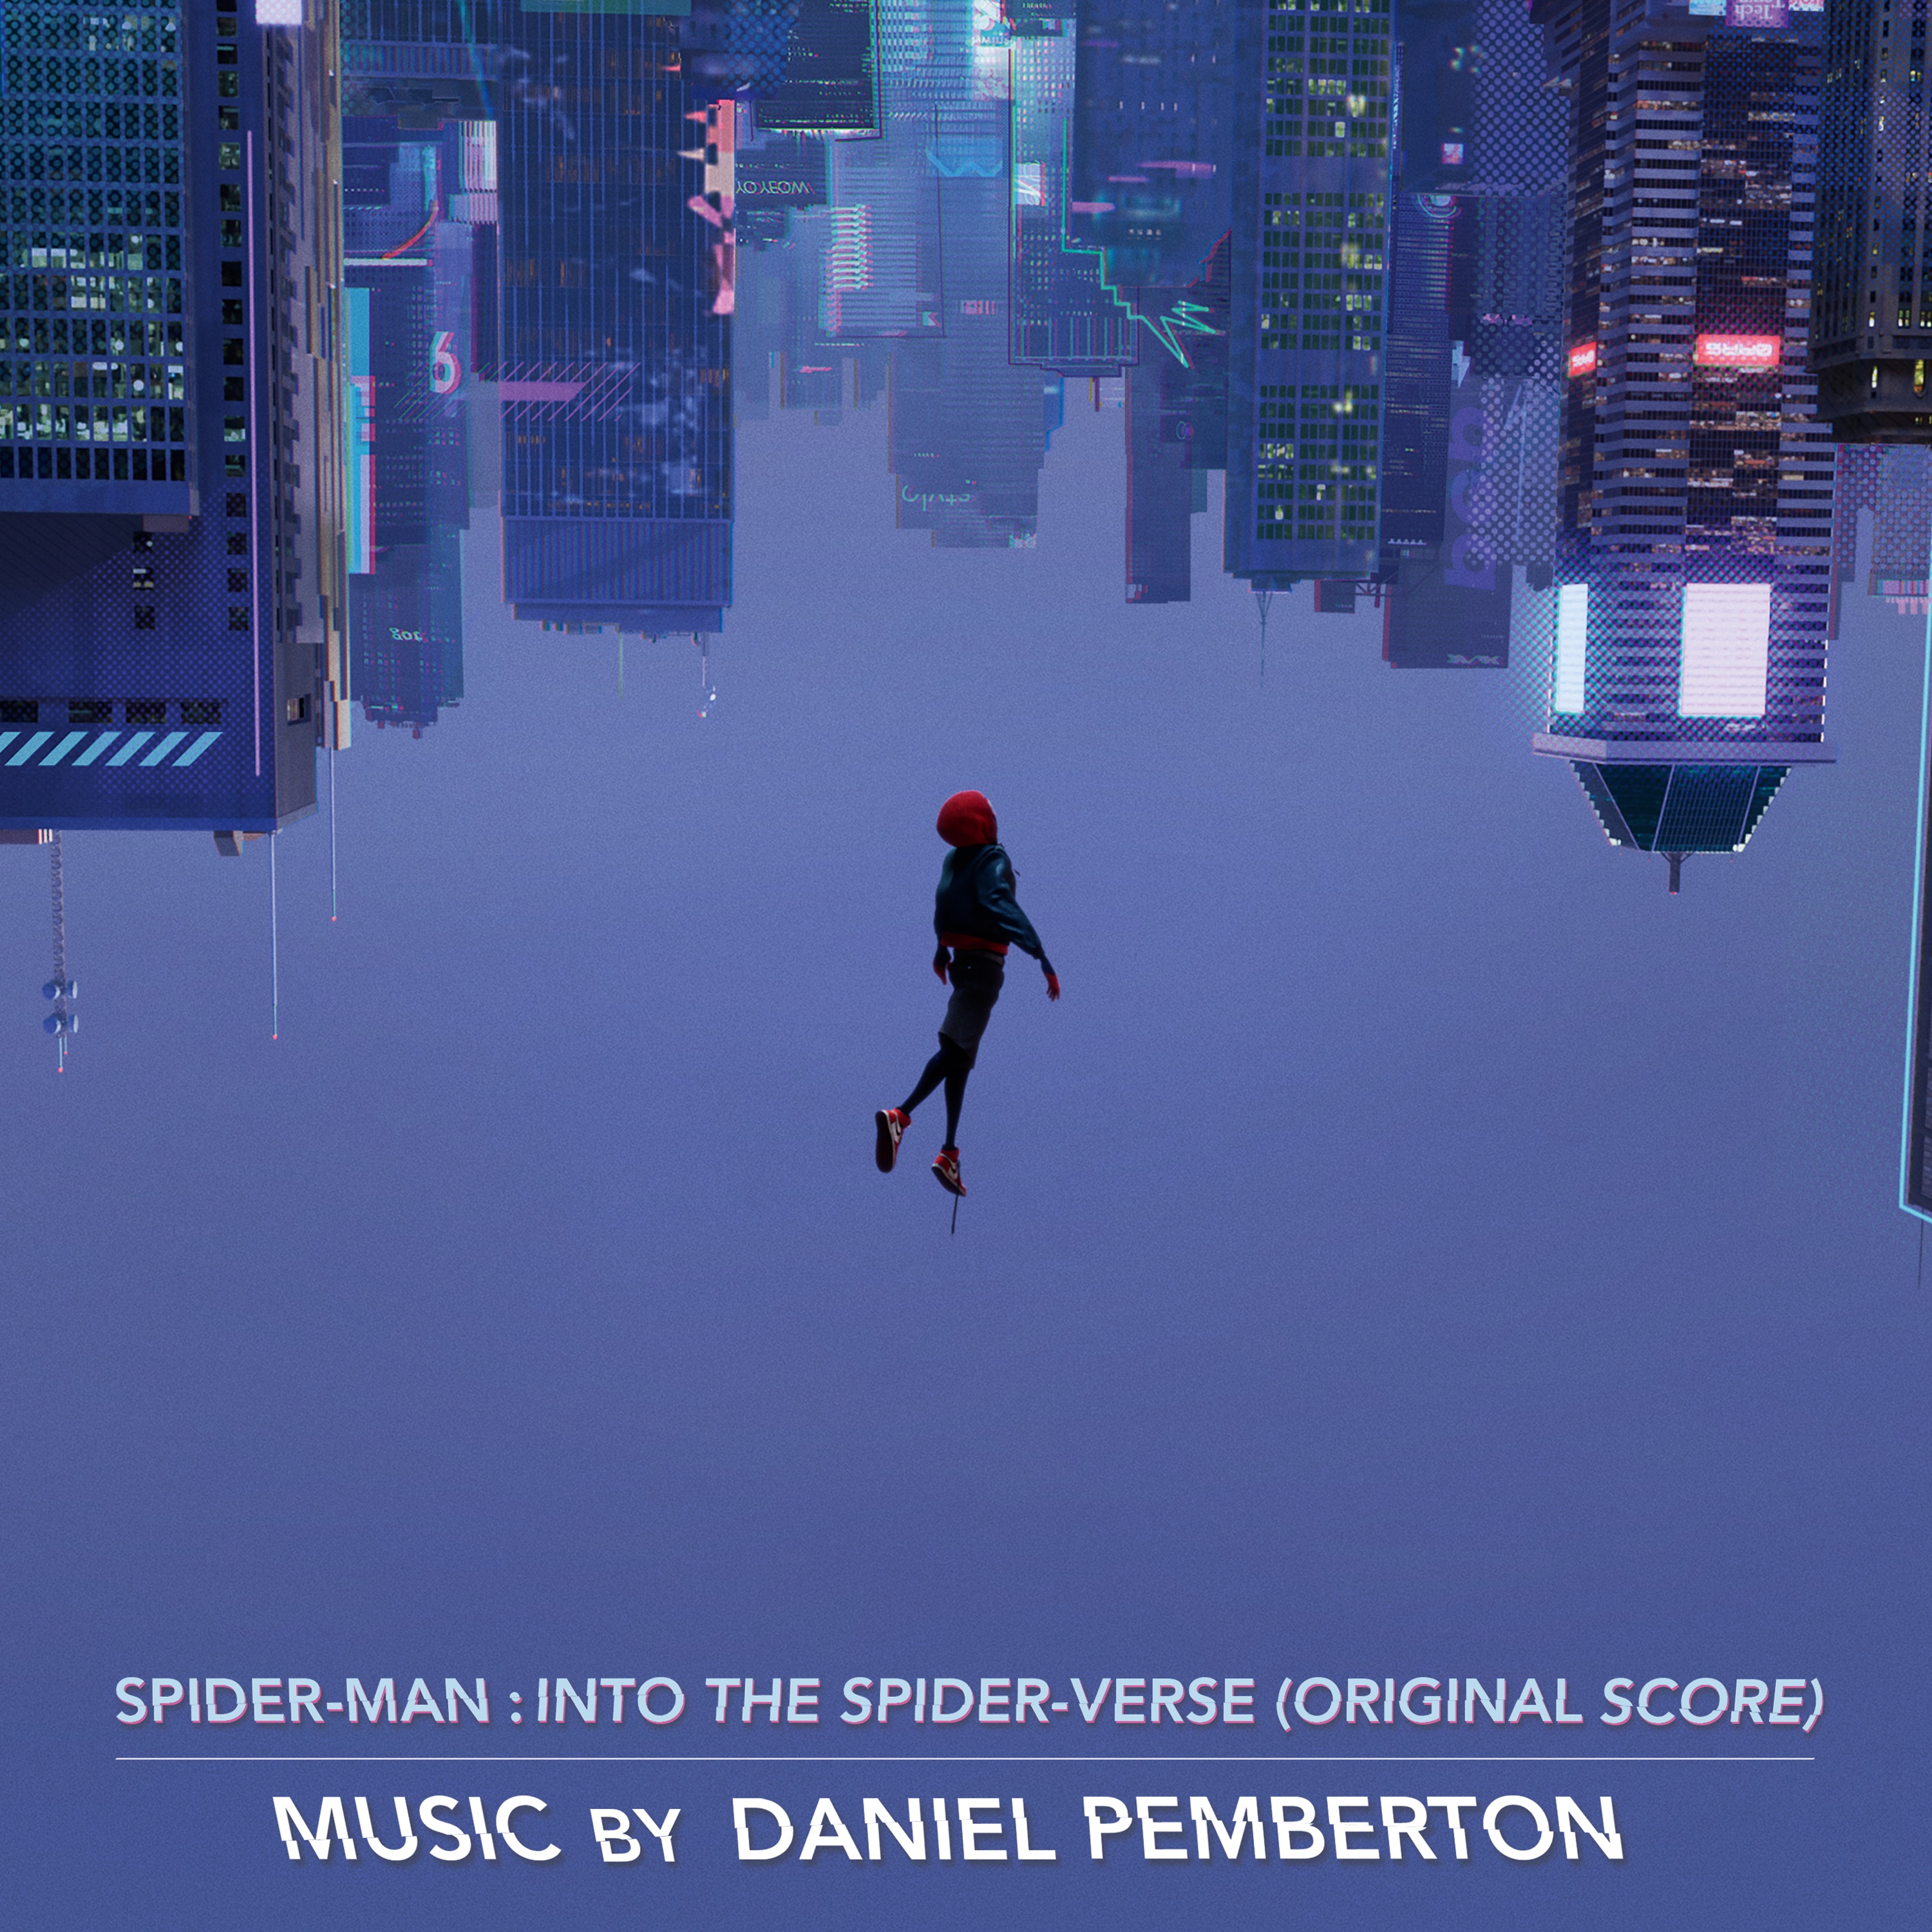 Spider-Man: Into the Spider-… Soundtrack Music - Complete Song List | Tunefind3000 x 3000